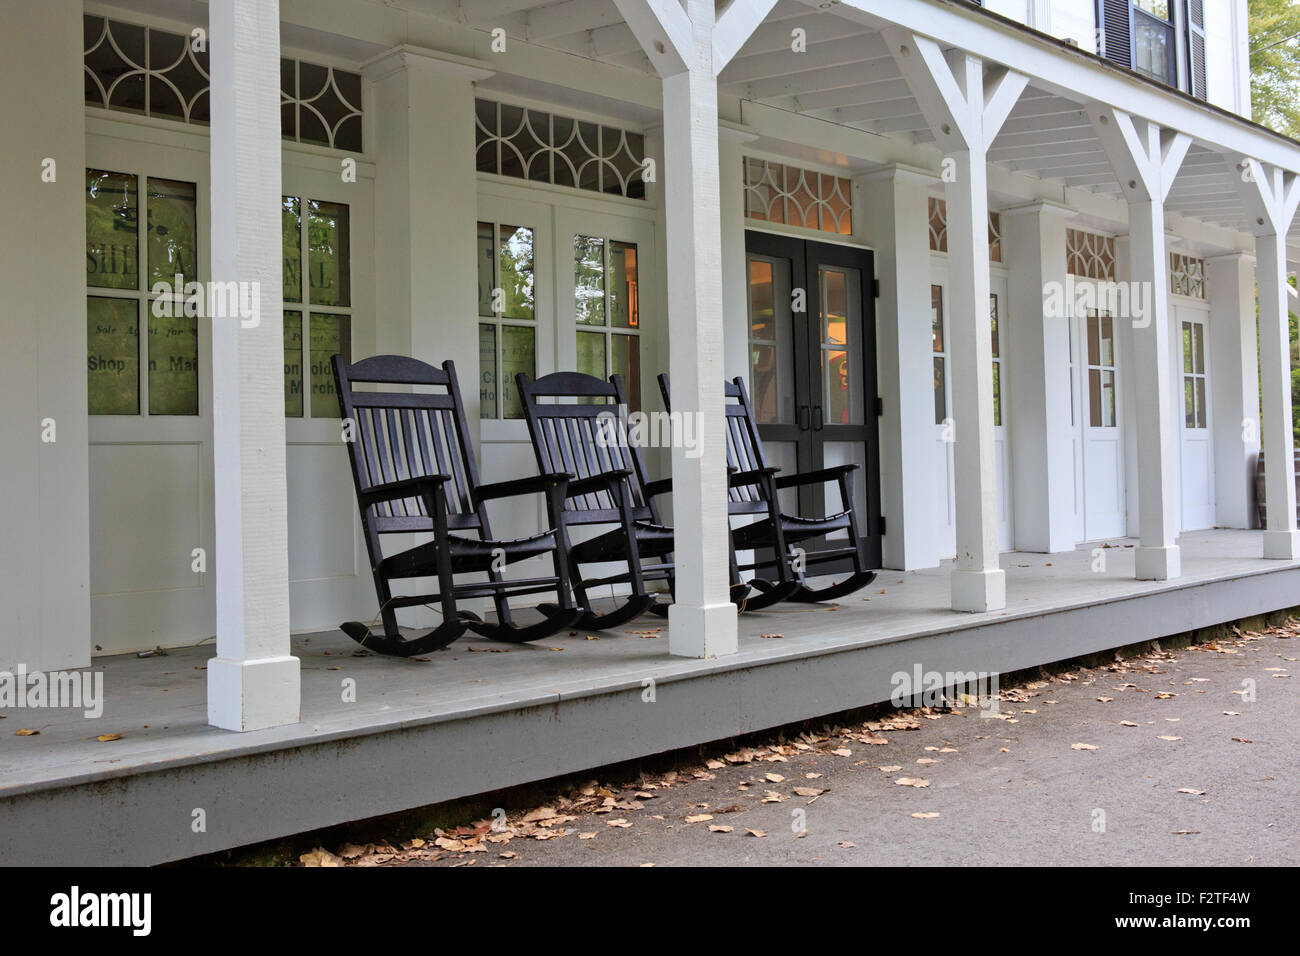 Rocking chairs on a porch. Stock Photo